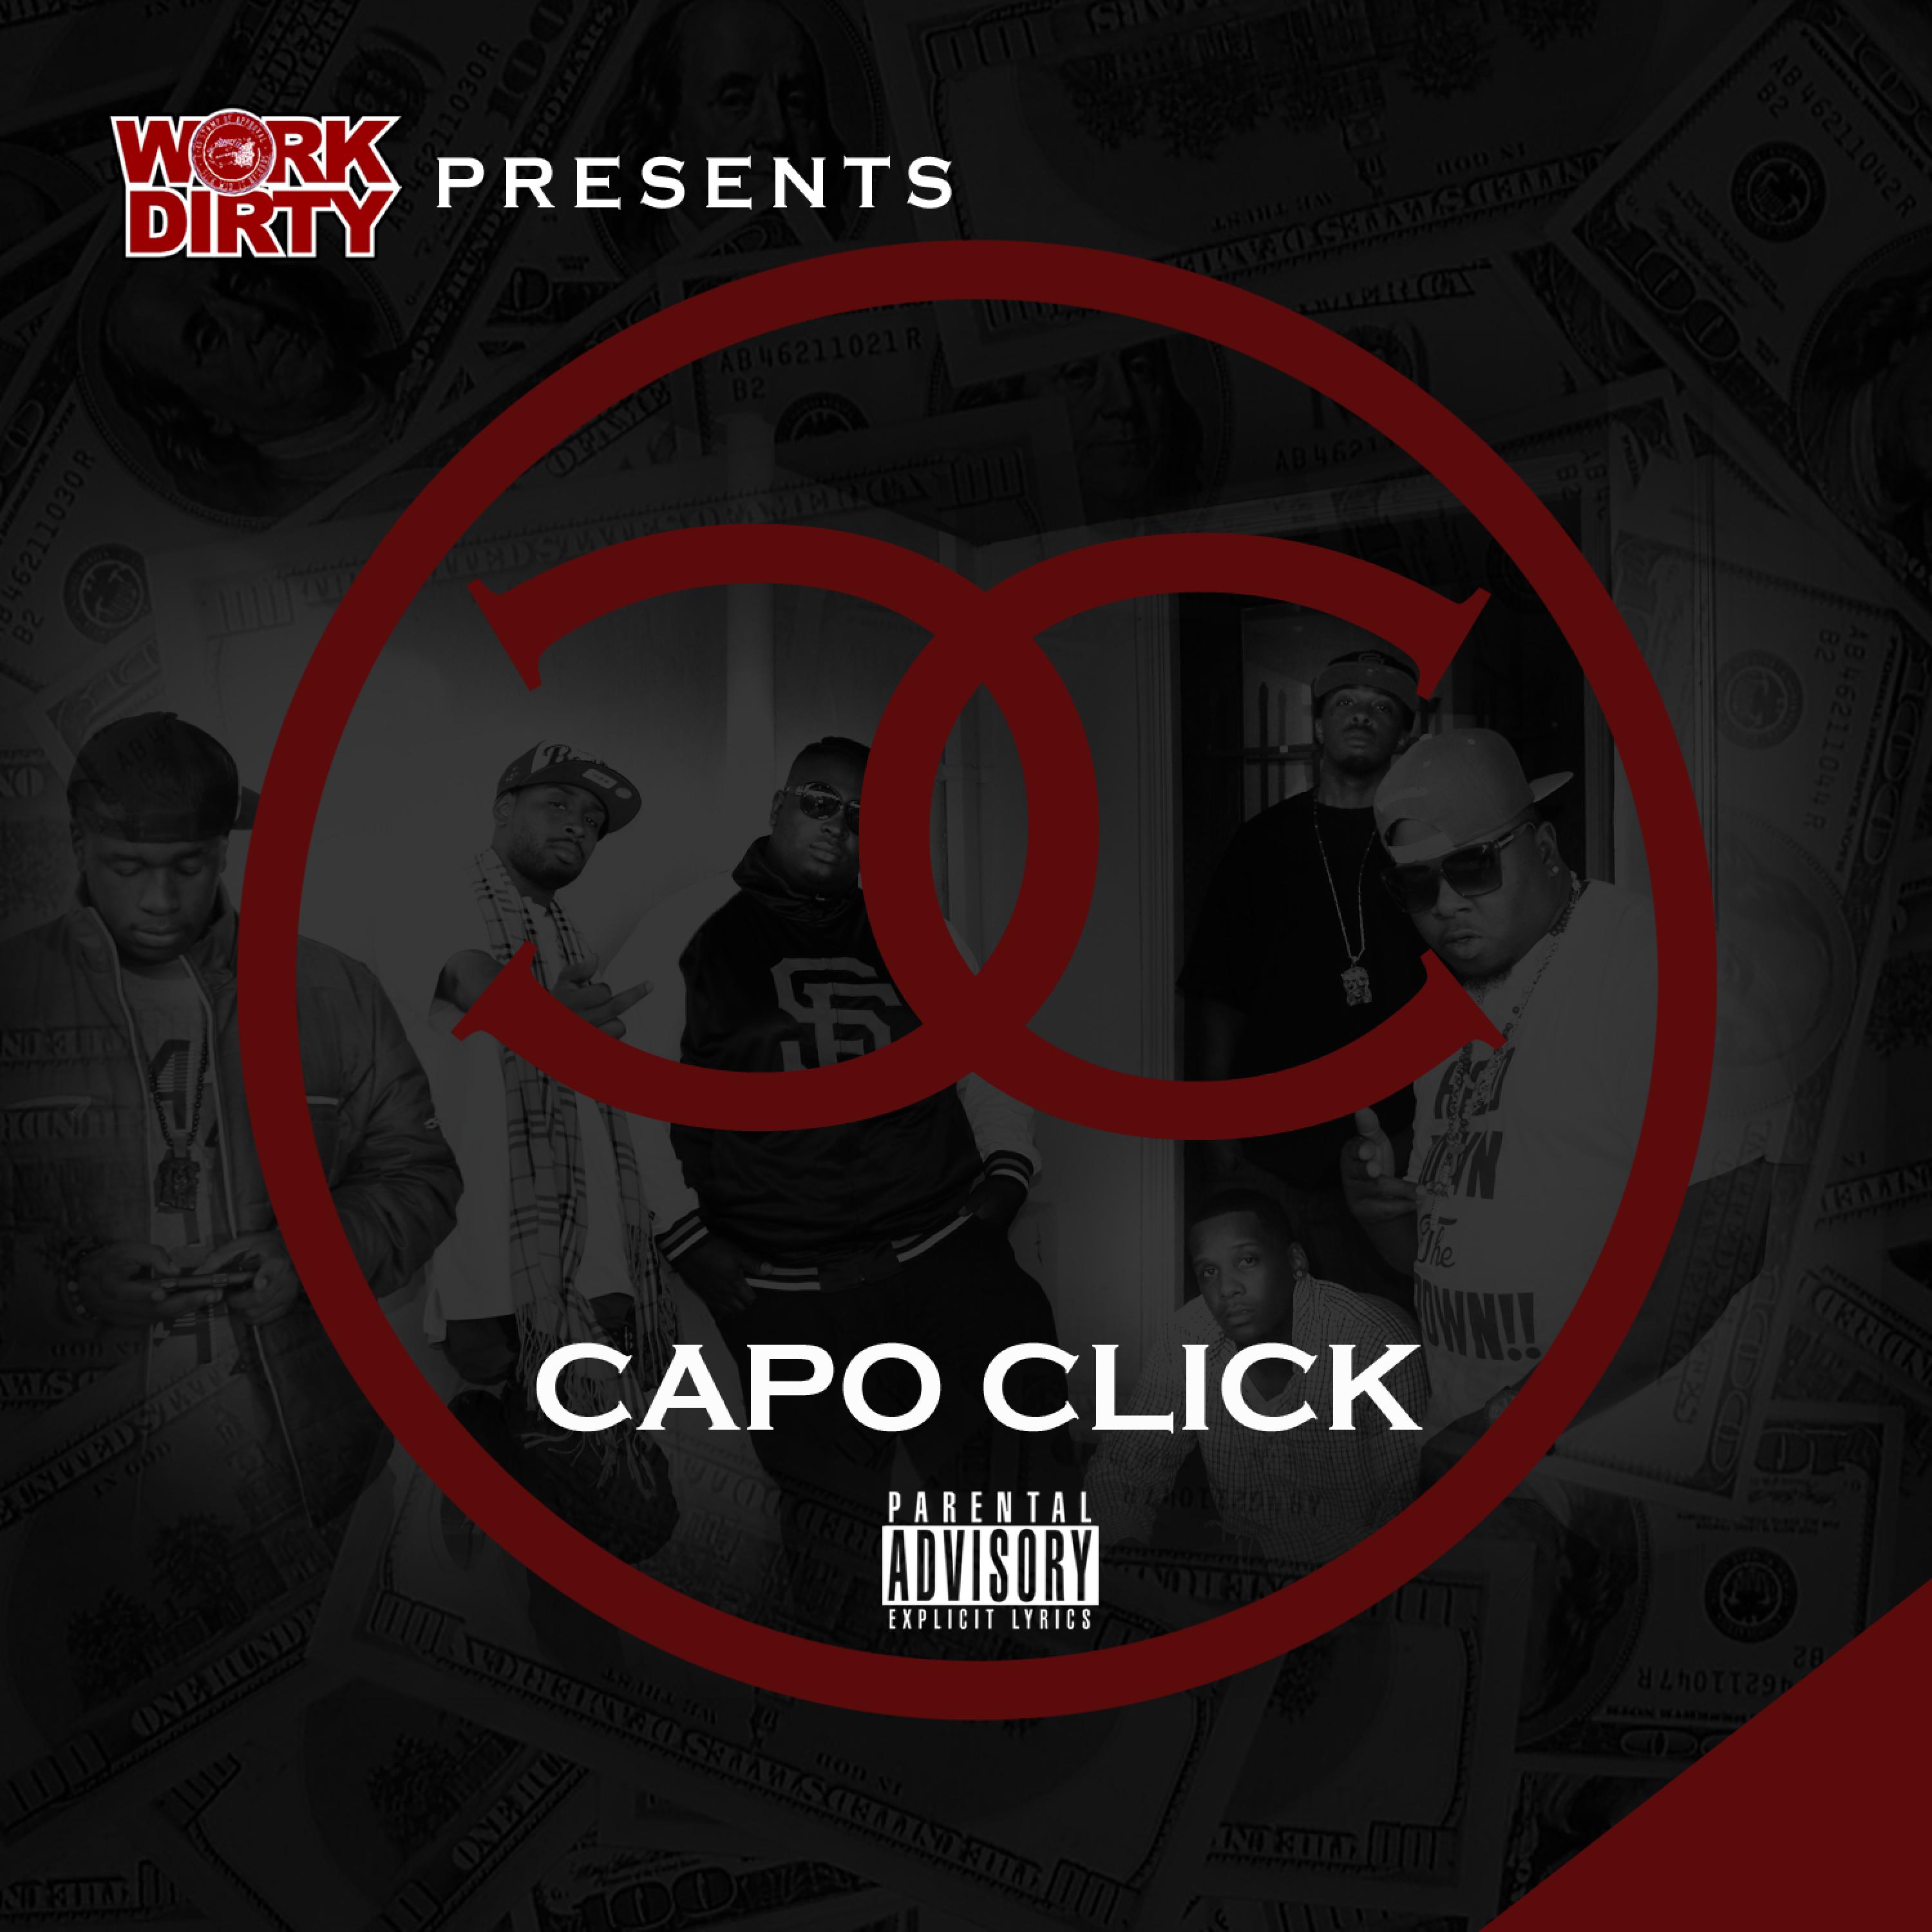 Work Dirty Presents: Capo Click